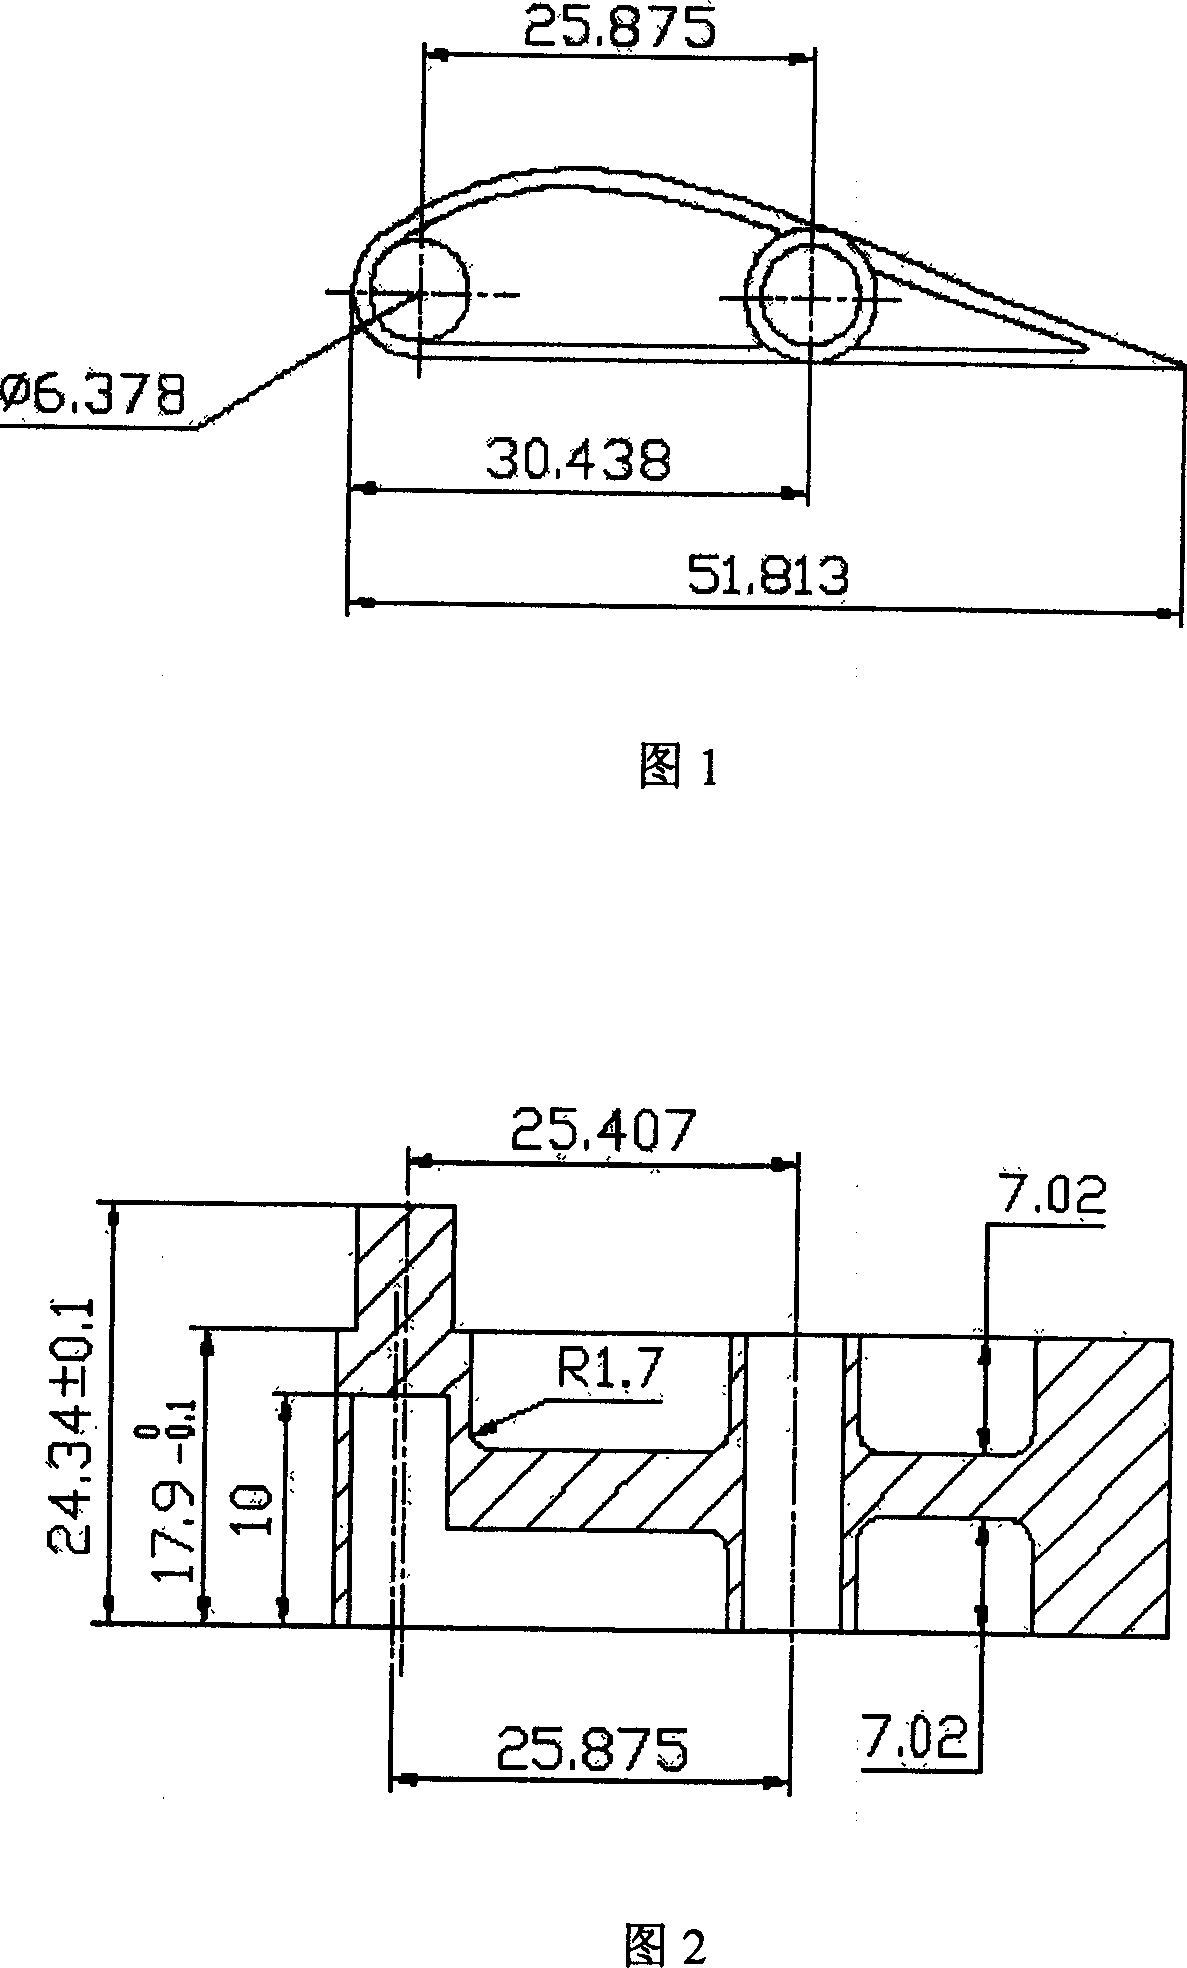 Method for preparing blades of adjustable nozzle in use for turbocharger of engine by using powder as raw material